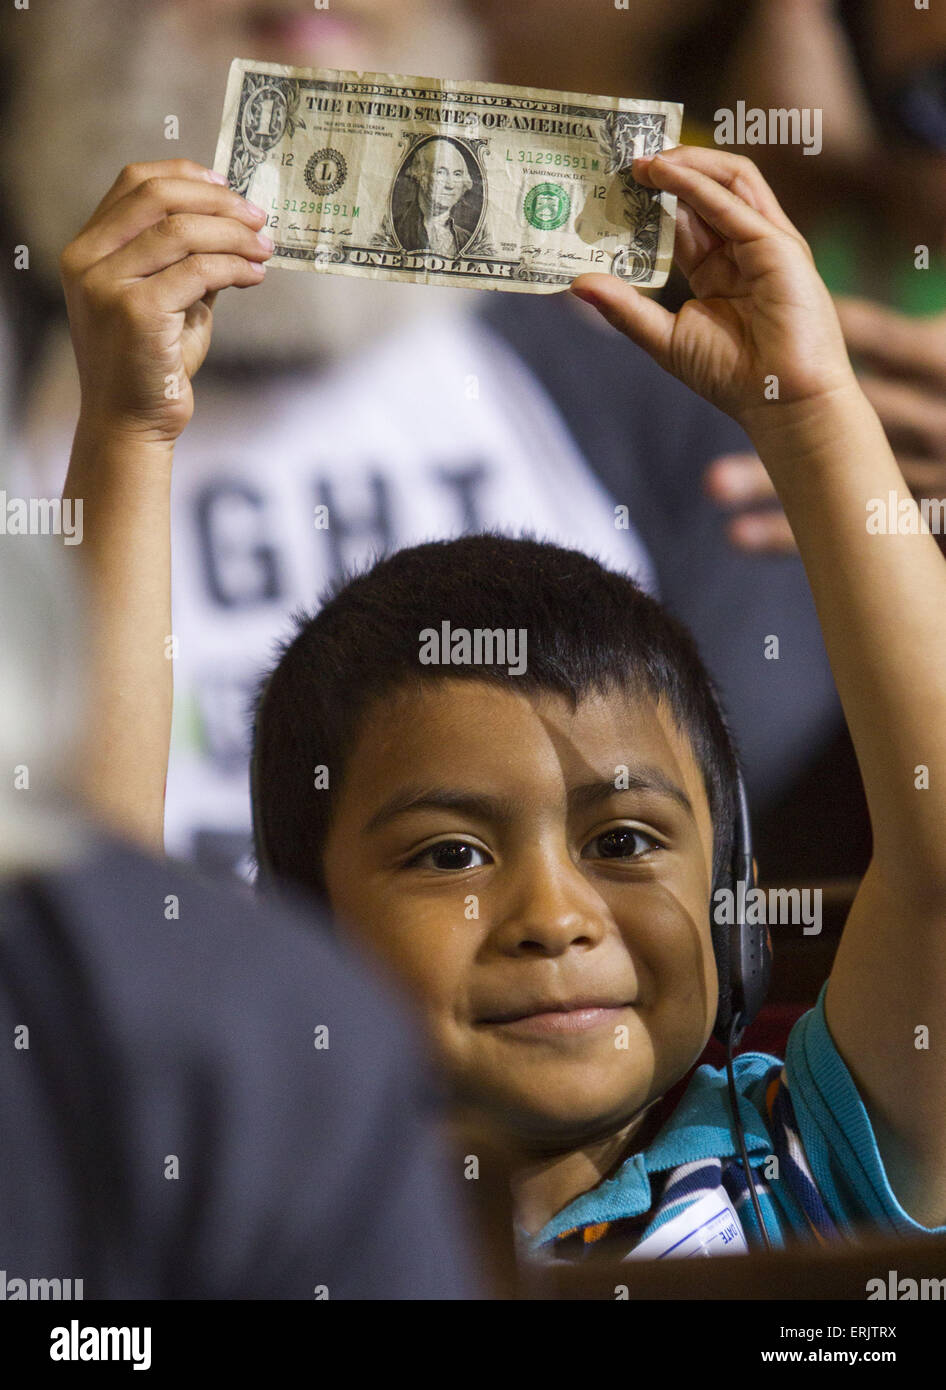 Los Angeles, California, USA. 3rd June, 2015. David Lazo, 5, raises a dollar bill as supporters await the Los Angeles City Council's vote an ordinance to raise the minimum wage in the city to $15 an hour by 2020 in Los Angeles. The City Council voted 13-1 to raise the minimum wage in Los Angeles to $15 an hour by 2020, but a second vote is required for final approval because the tally was not unanimous. If given final approval and signed by Mayor Eric Garcetti, the city, with 3.8 million residents, would become the biggest in the country with a $15 minimum wage. © ZUMA Press, Inc./Alamy Live N Stock Photo